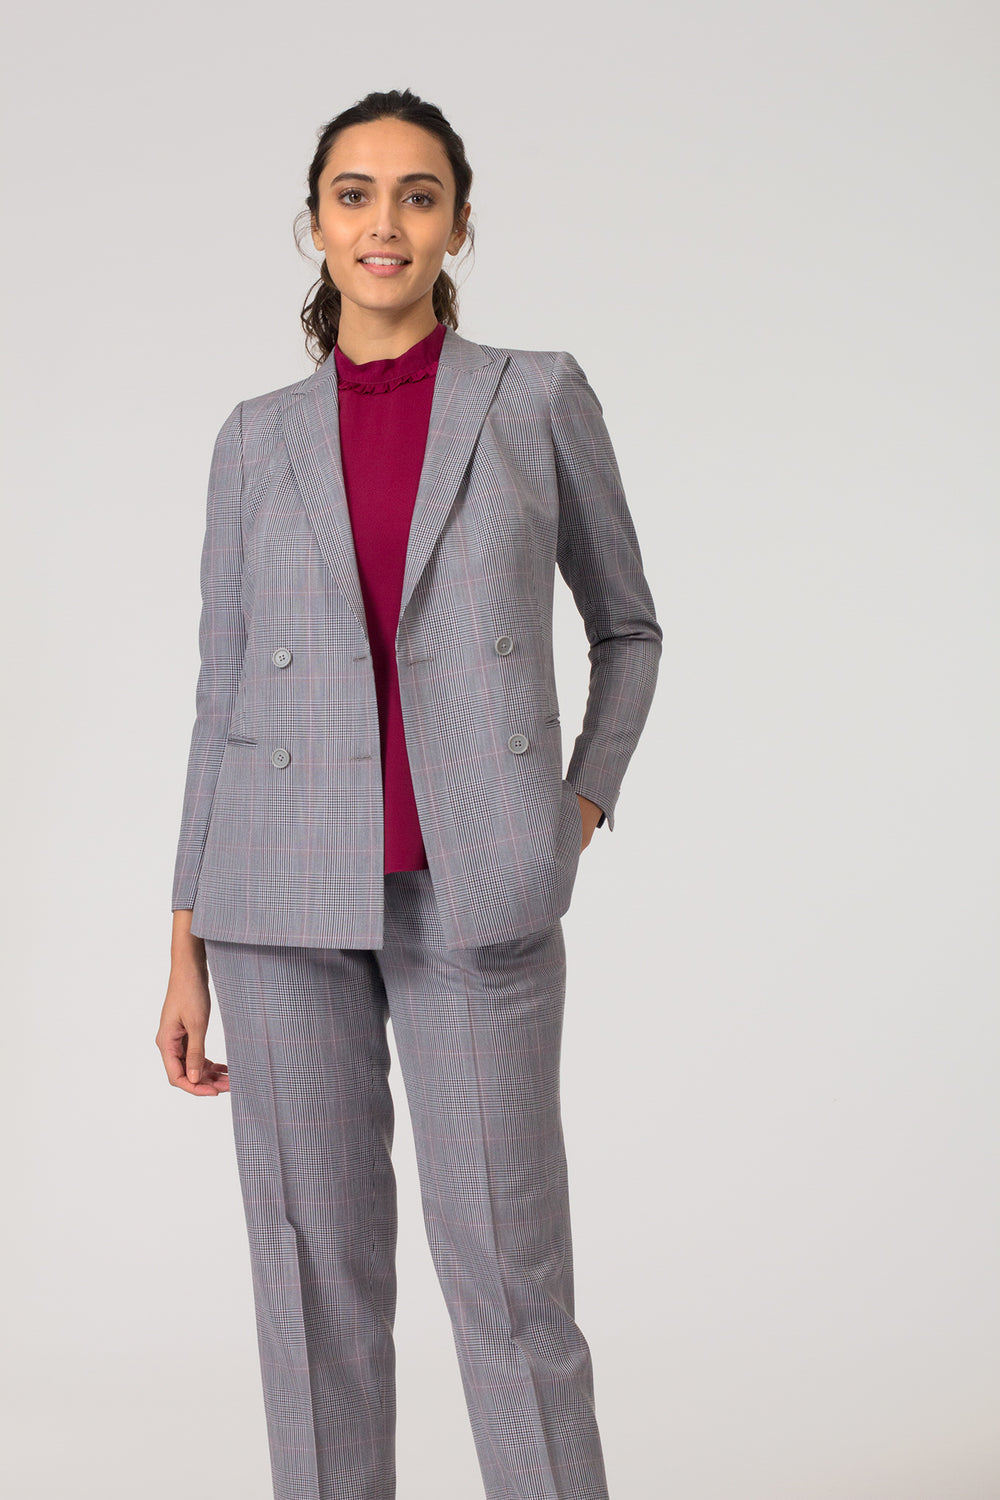 Grey Formal Blazer Suit for Working Women. Shop for stylish formal trousers and suits, professional looks at www.intermod.in